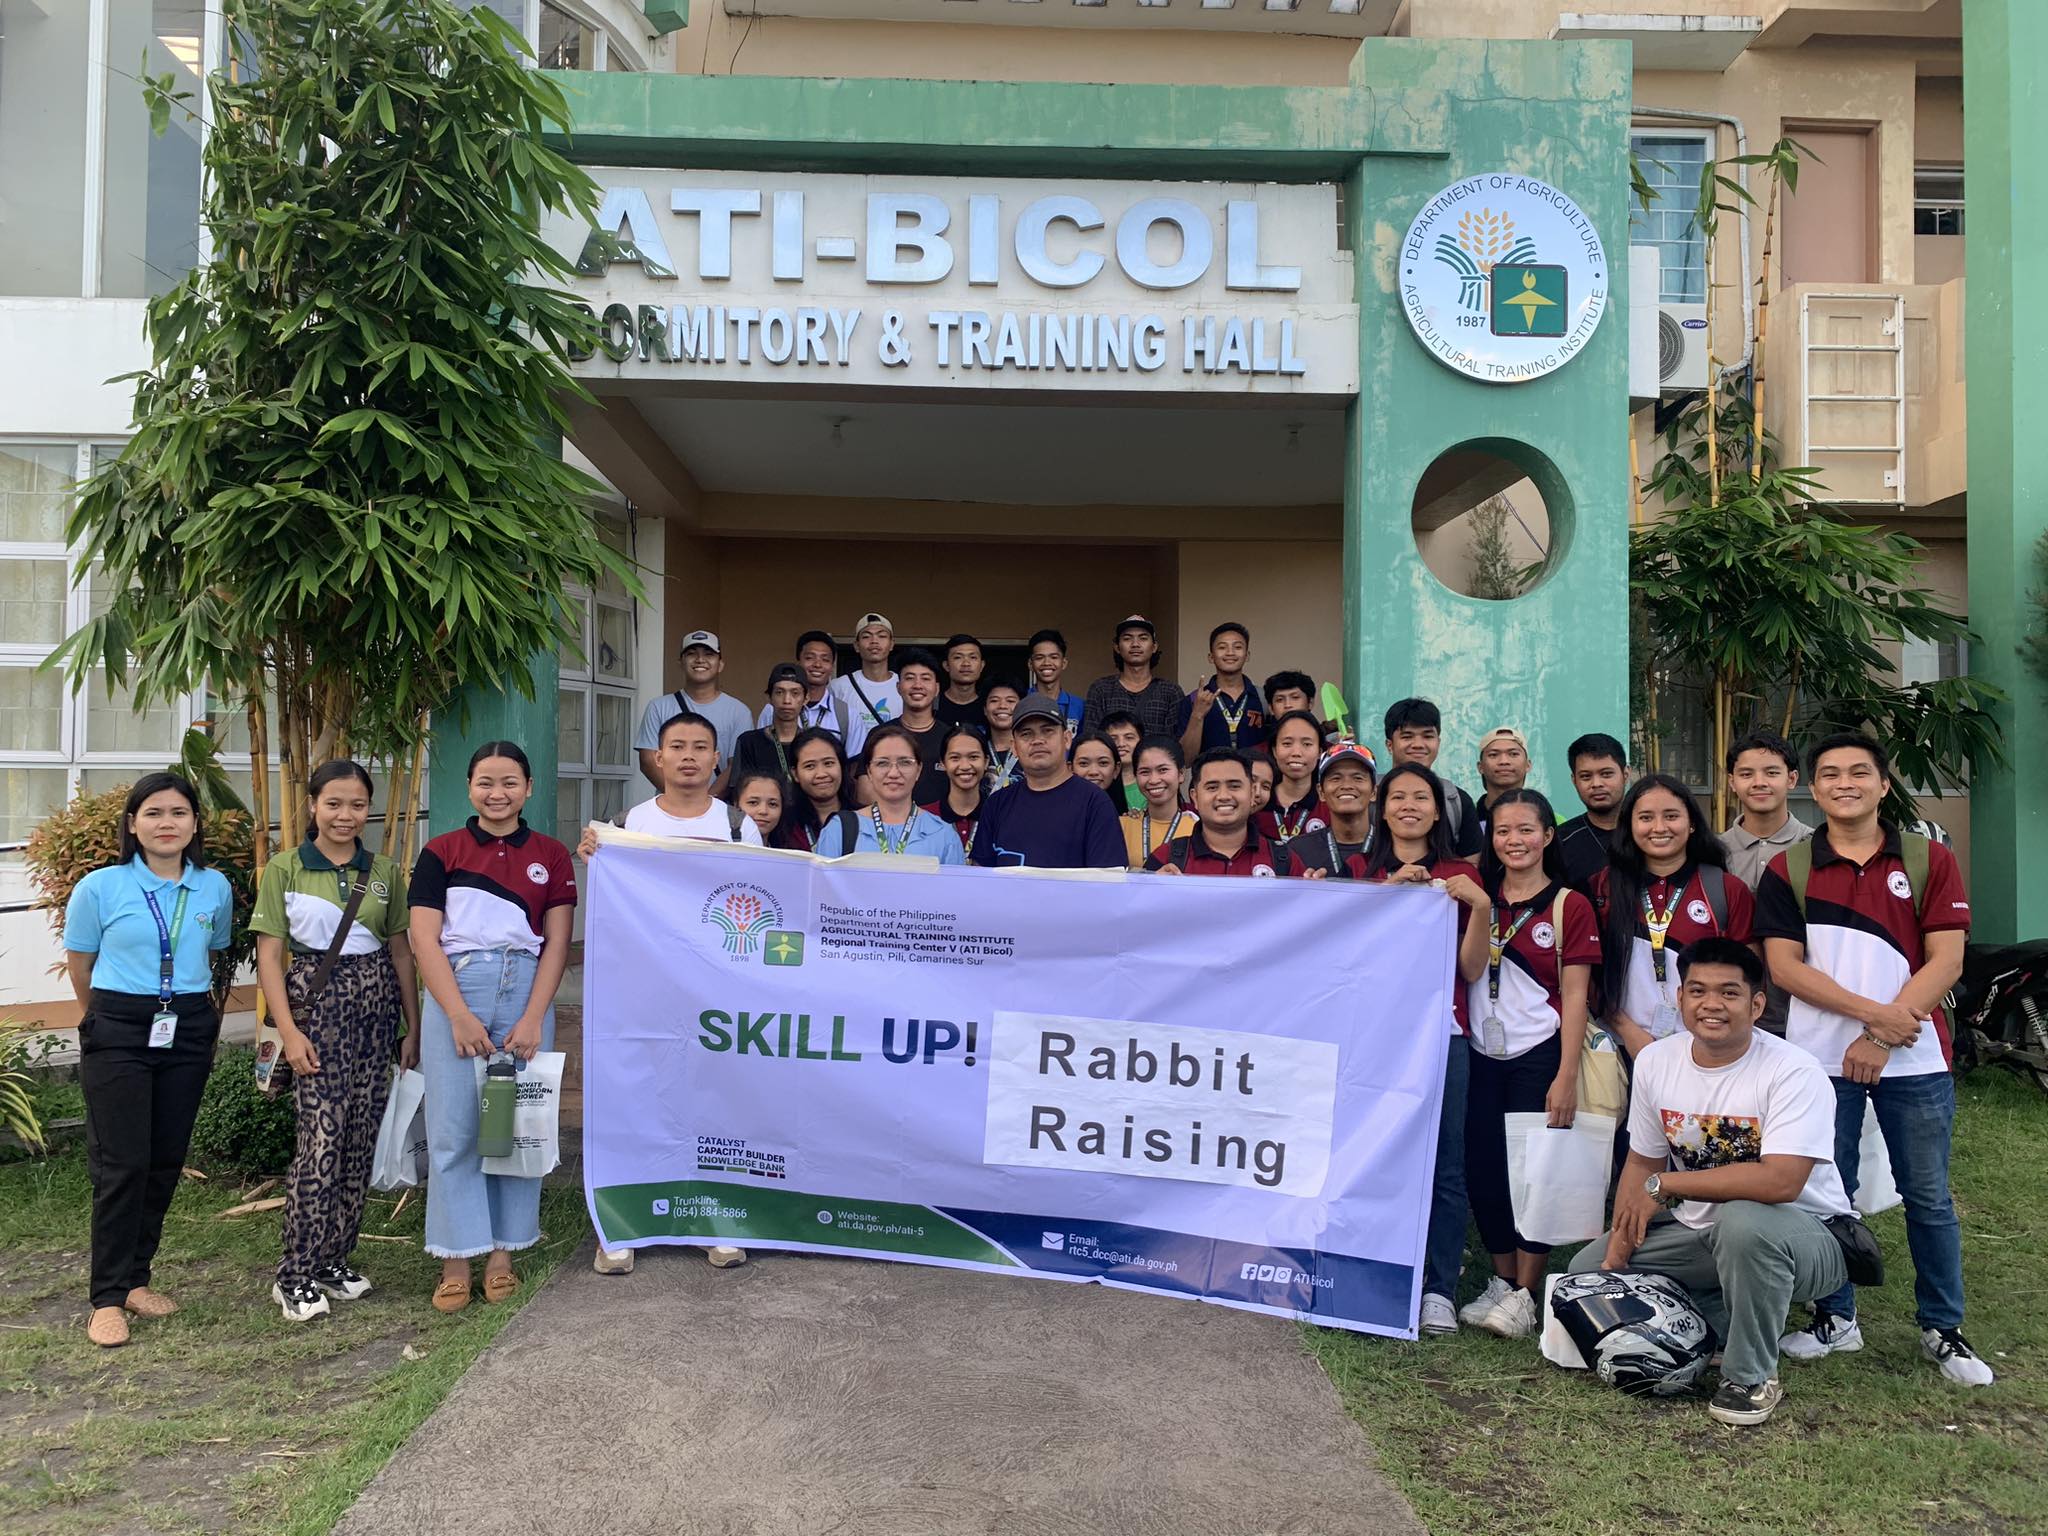 CANR TEAMS UP WITH ATI-BICOL FOR A SKILL-UP ACTIVITY